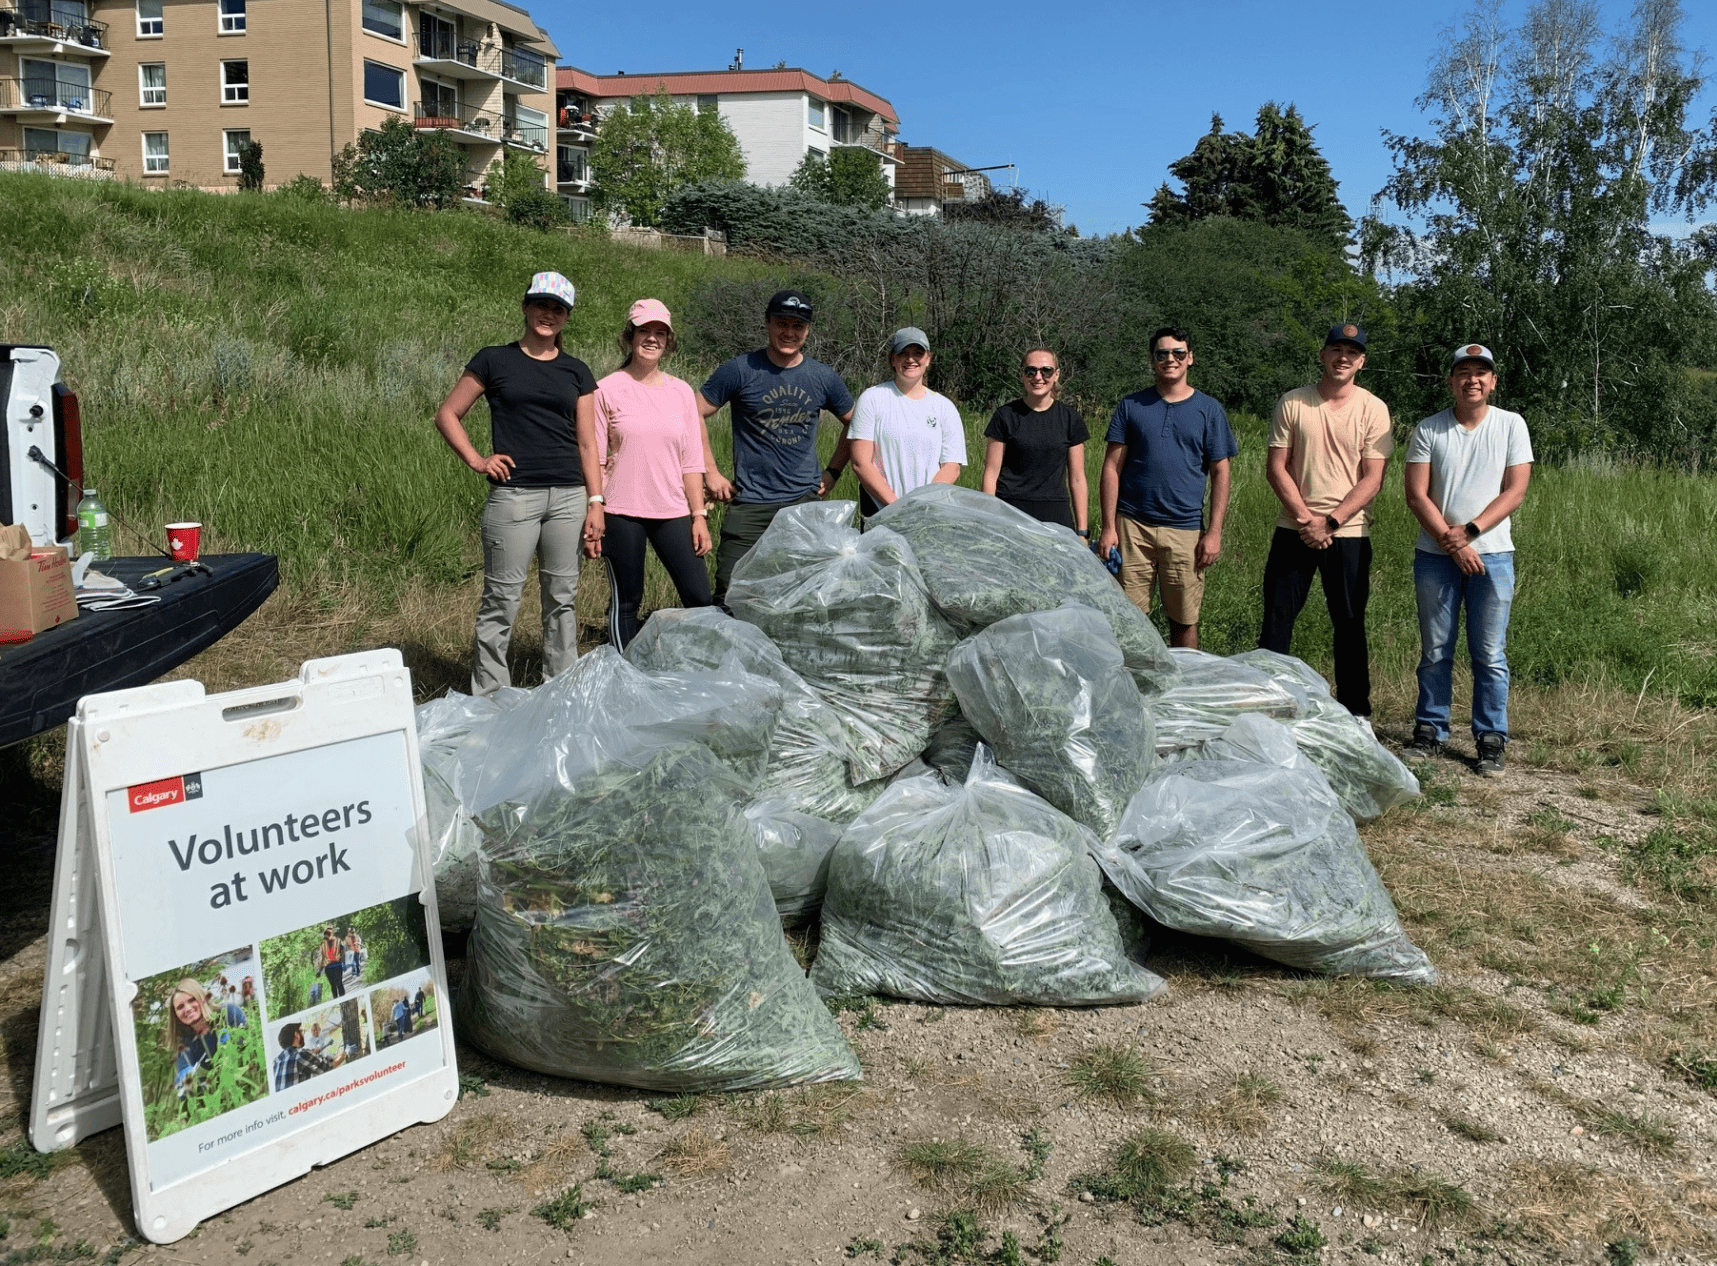 360 employees volunteering for the City of Calgary Invasive Weed Removal Program. Photo shows 8 people standing behind a large pile of bags filled with Canadian Thistle. There is a sign beside the bags that shows the City of Calgary logo and says 'Volunteers at work'.